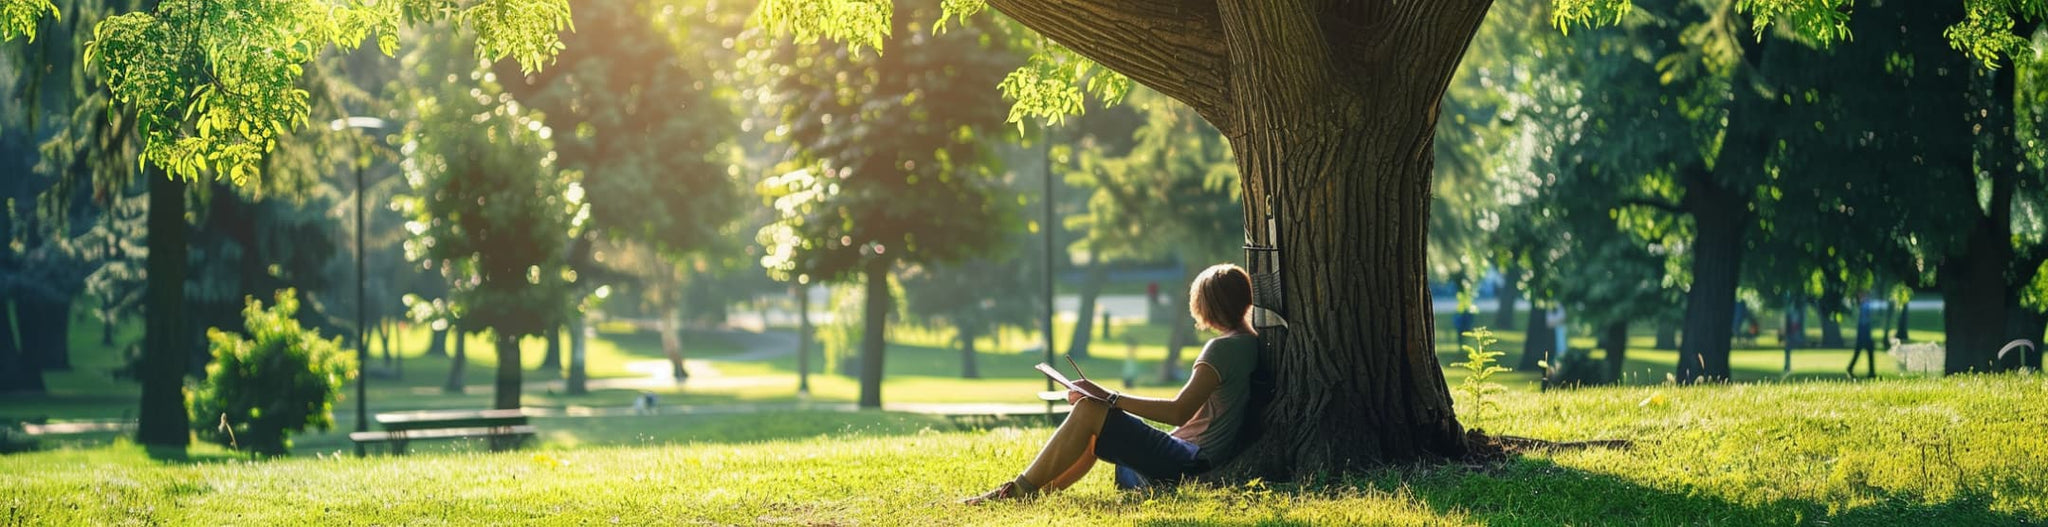 An individual under a tree in a quiet park, writing about their June experiences